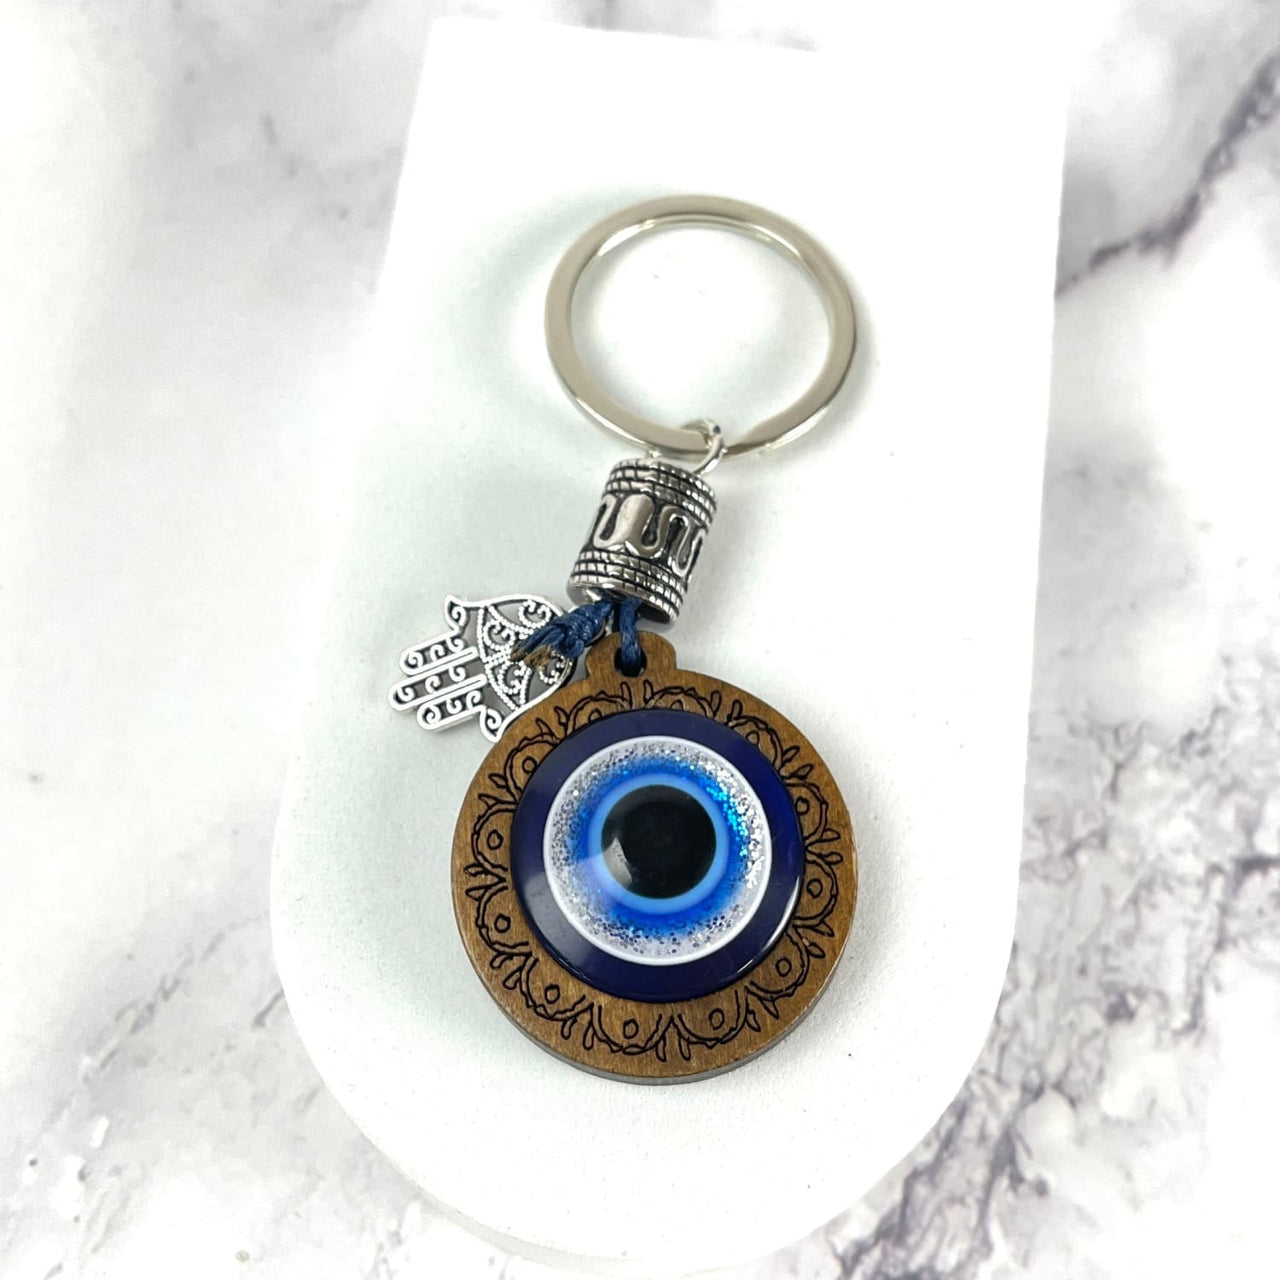 Evil Eye Keychain with Blue Eye and Silver Ring - Protective Amulet #Q198